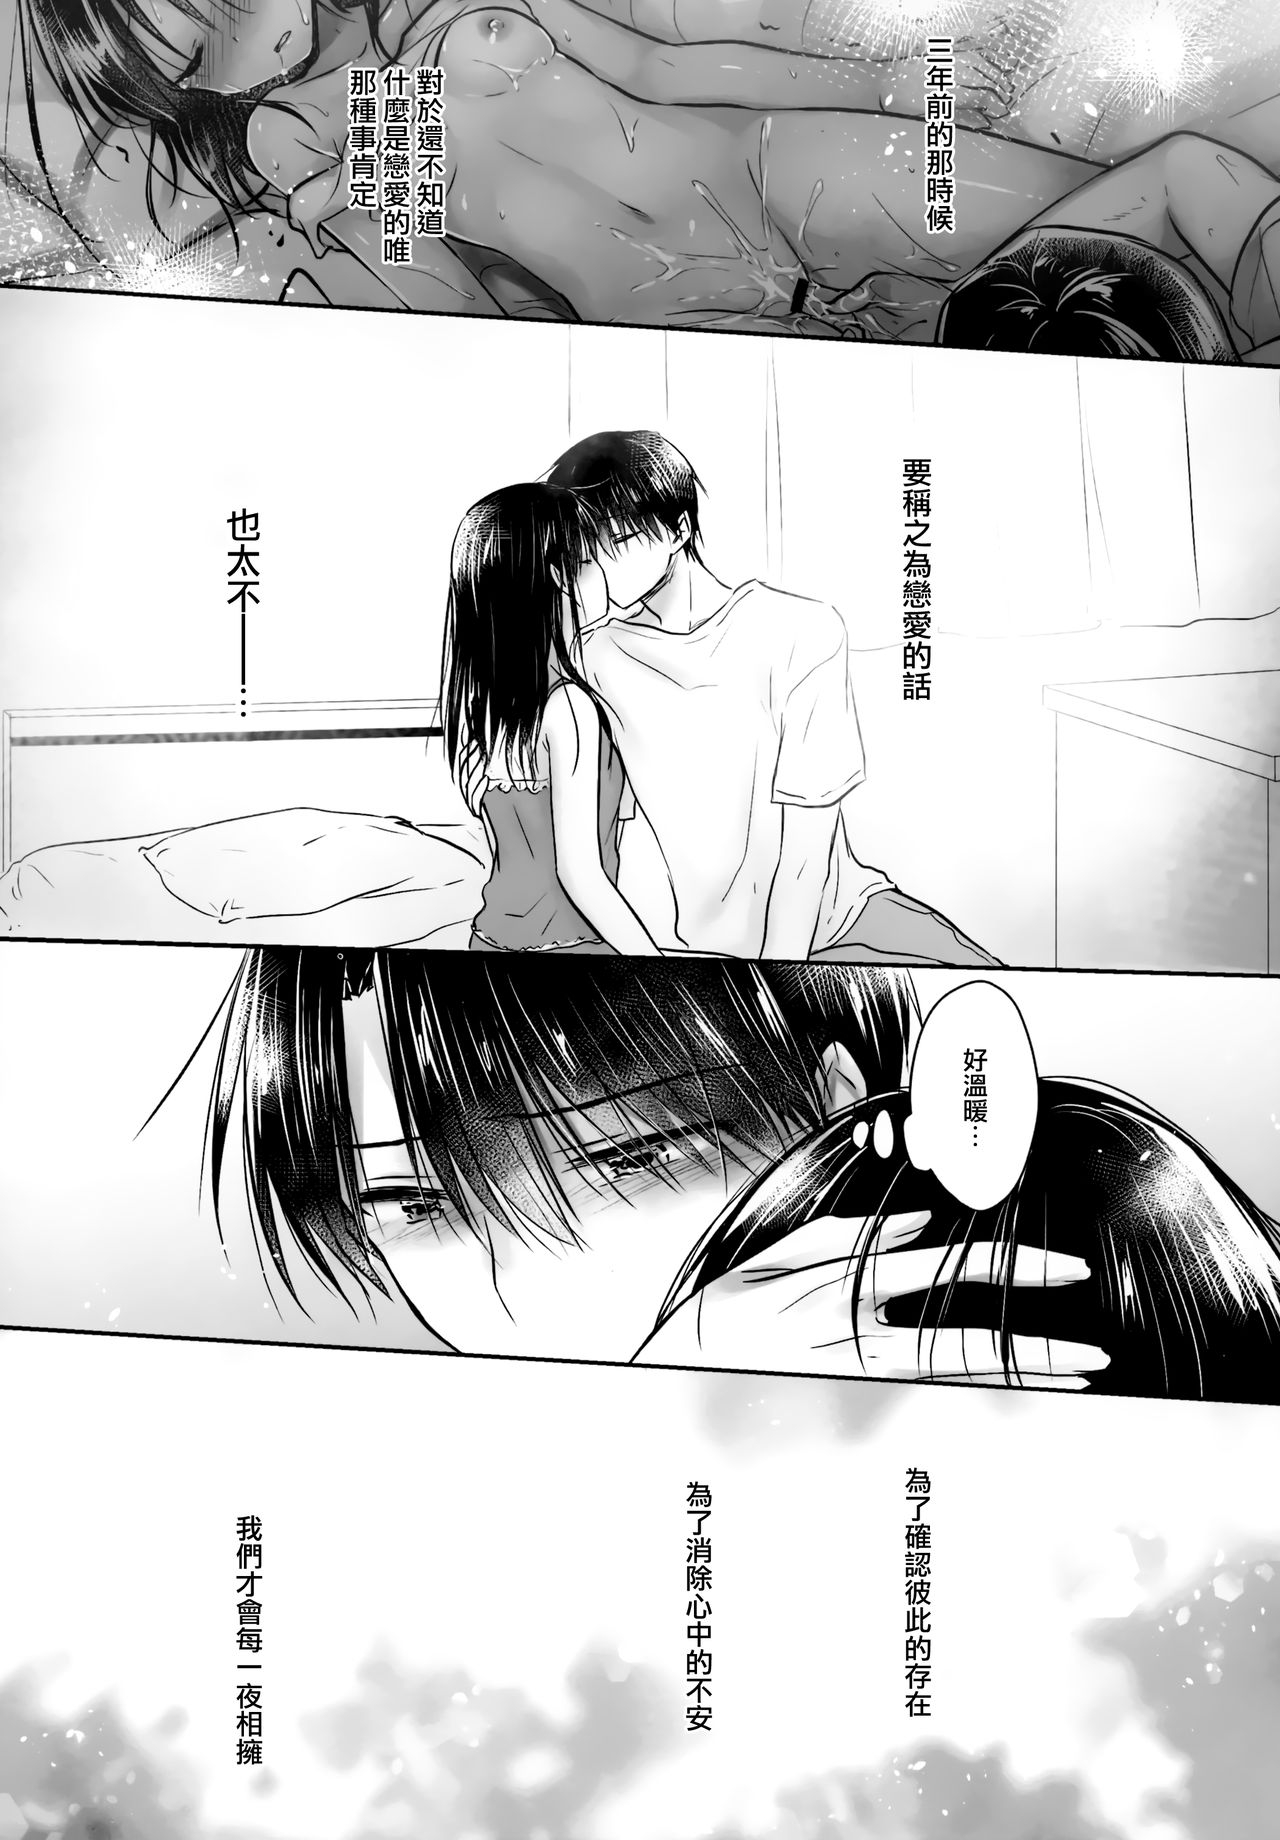 (C96) [Aquadrop (Mikami Mika)] Omoide Sex [Chinese] [山樱汉化] page 50 full